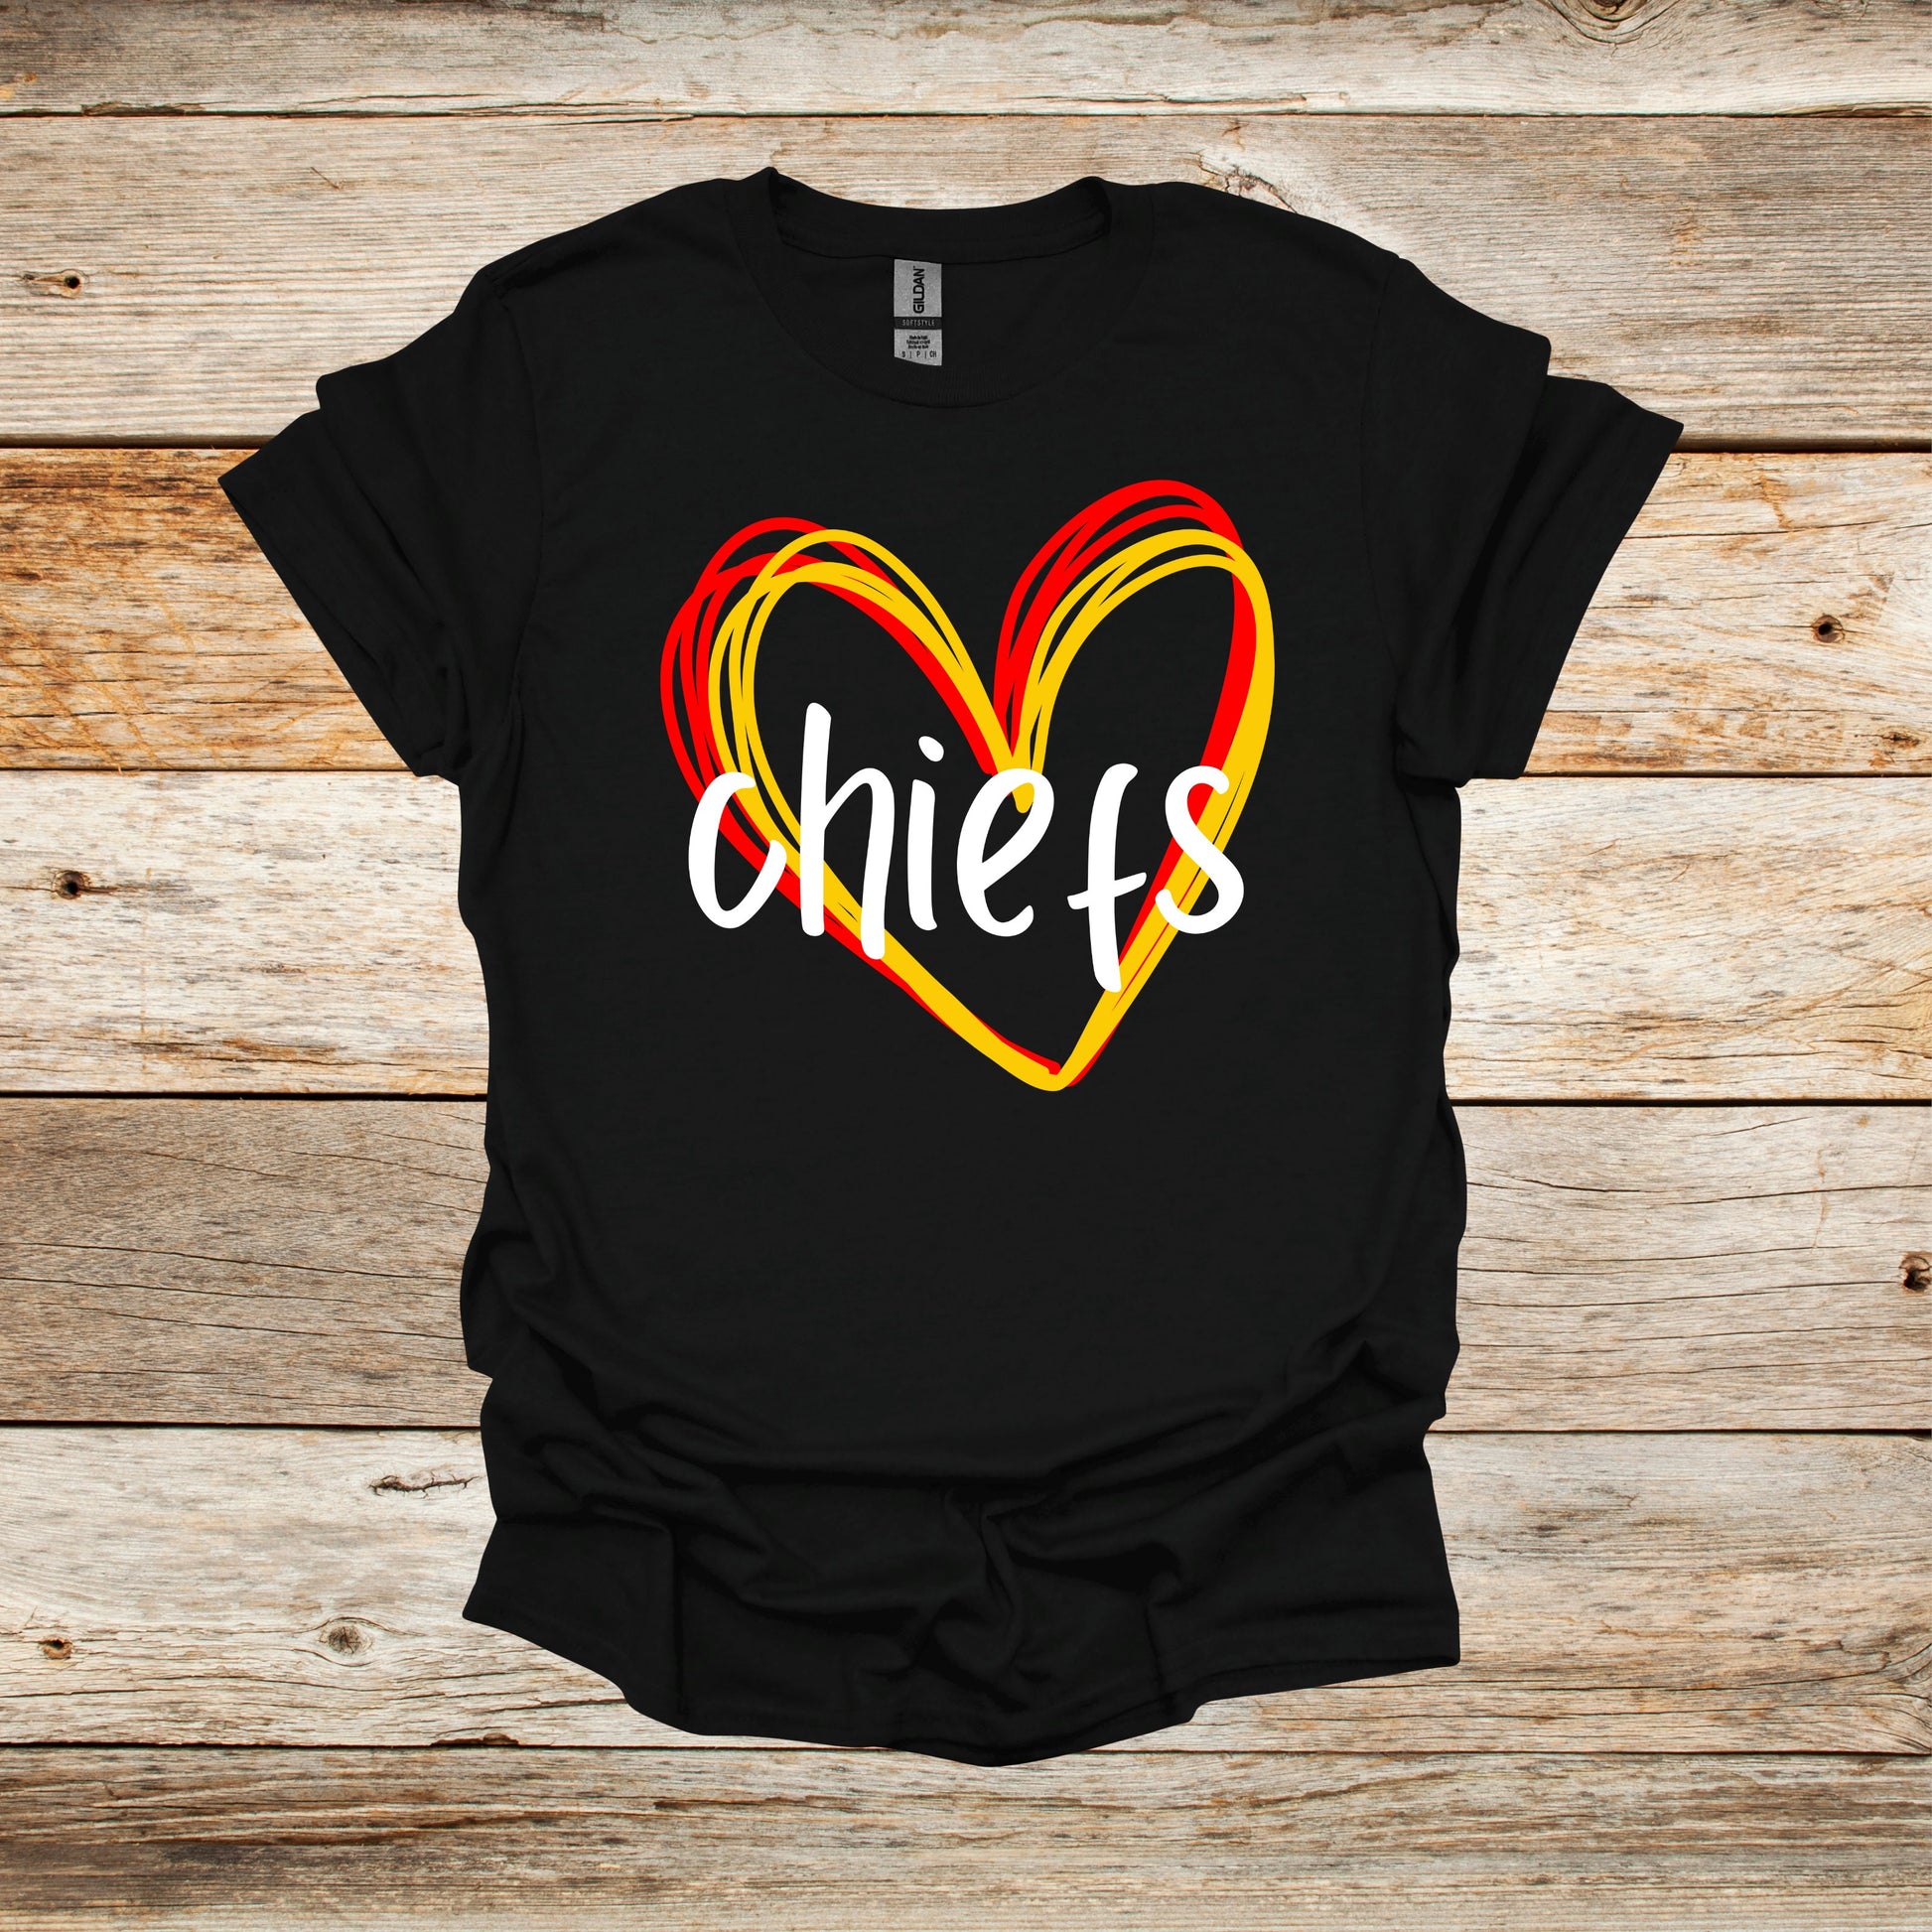 Football T-Shirt - Kansas City Chiefs - Adult and Children's Tee Shirts - Sports T-Shirts Graphic Avenue Black Adult Small 